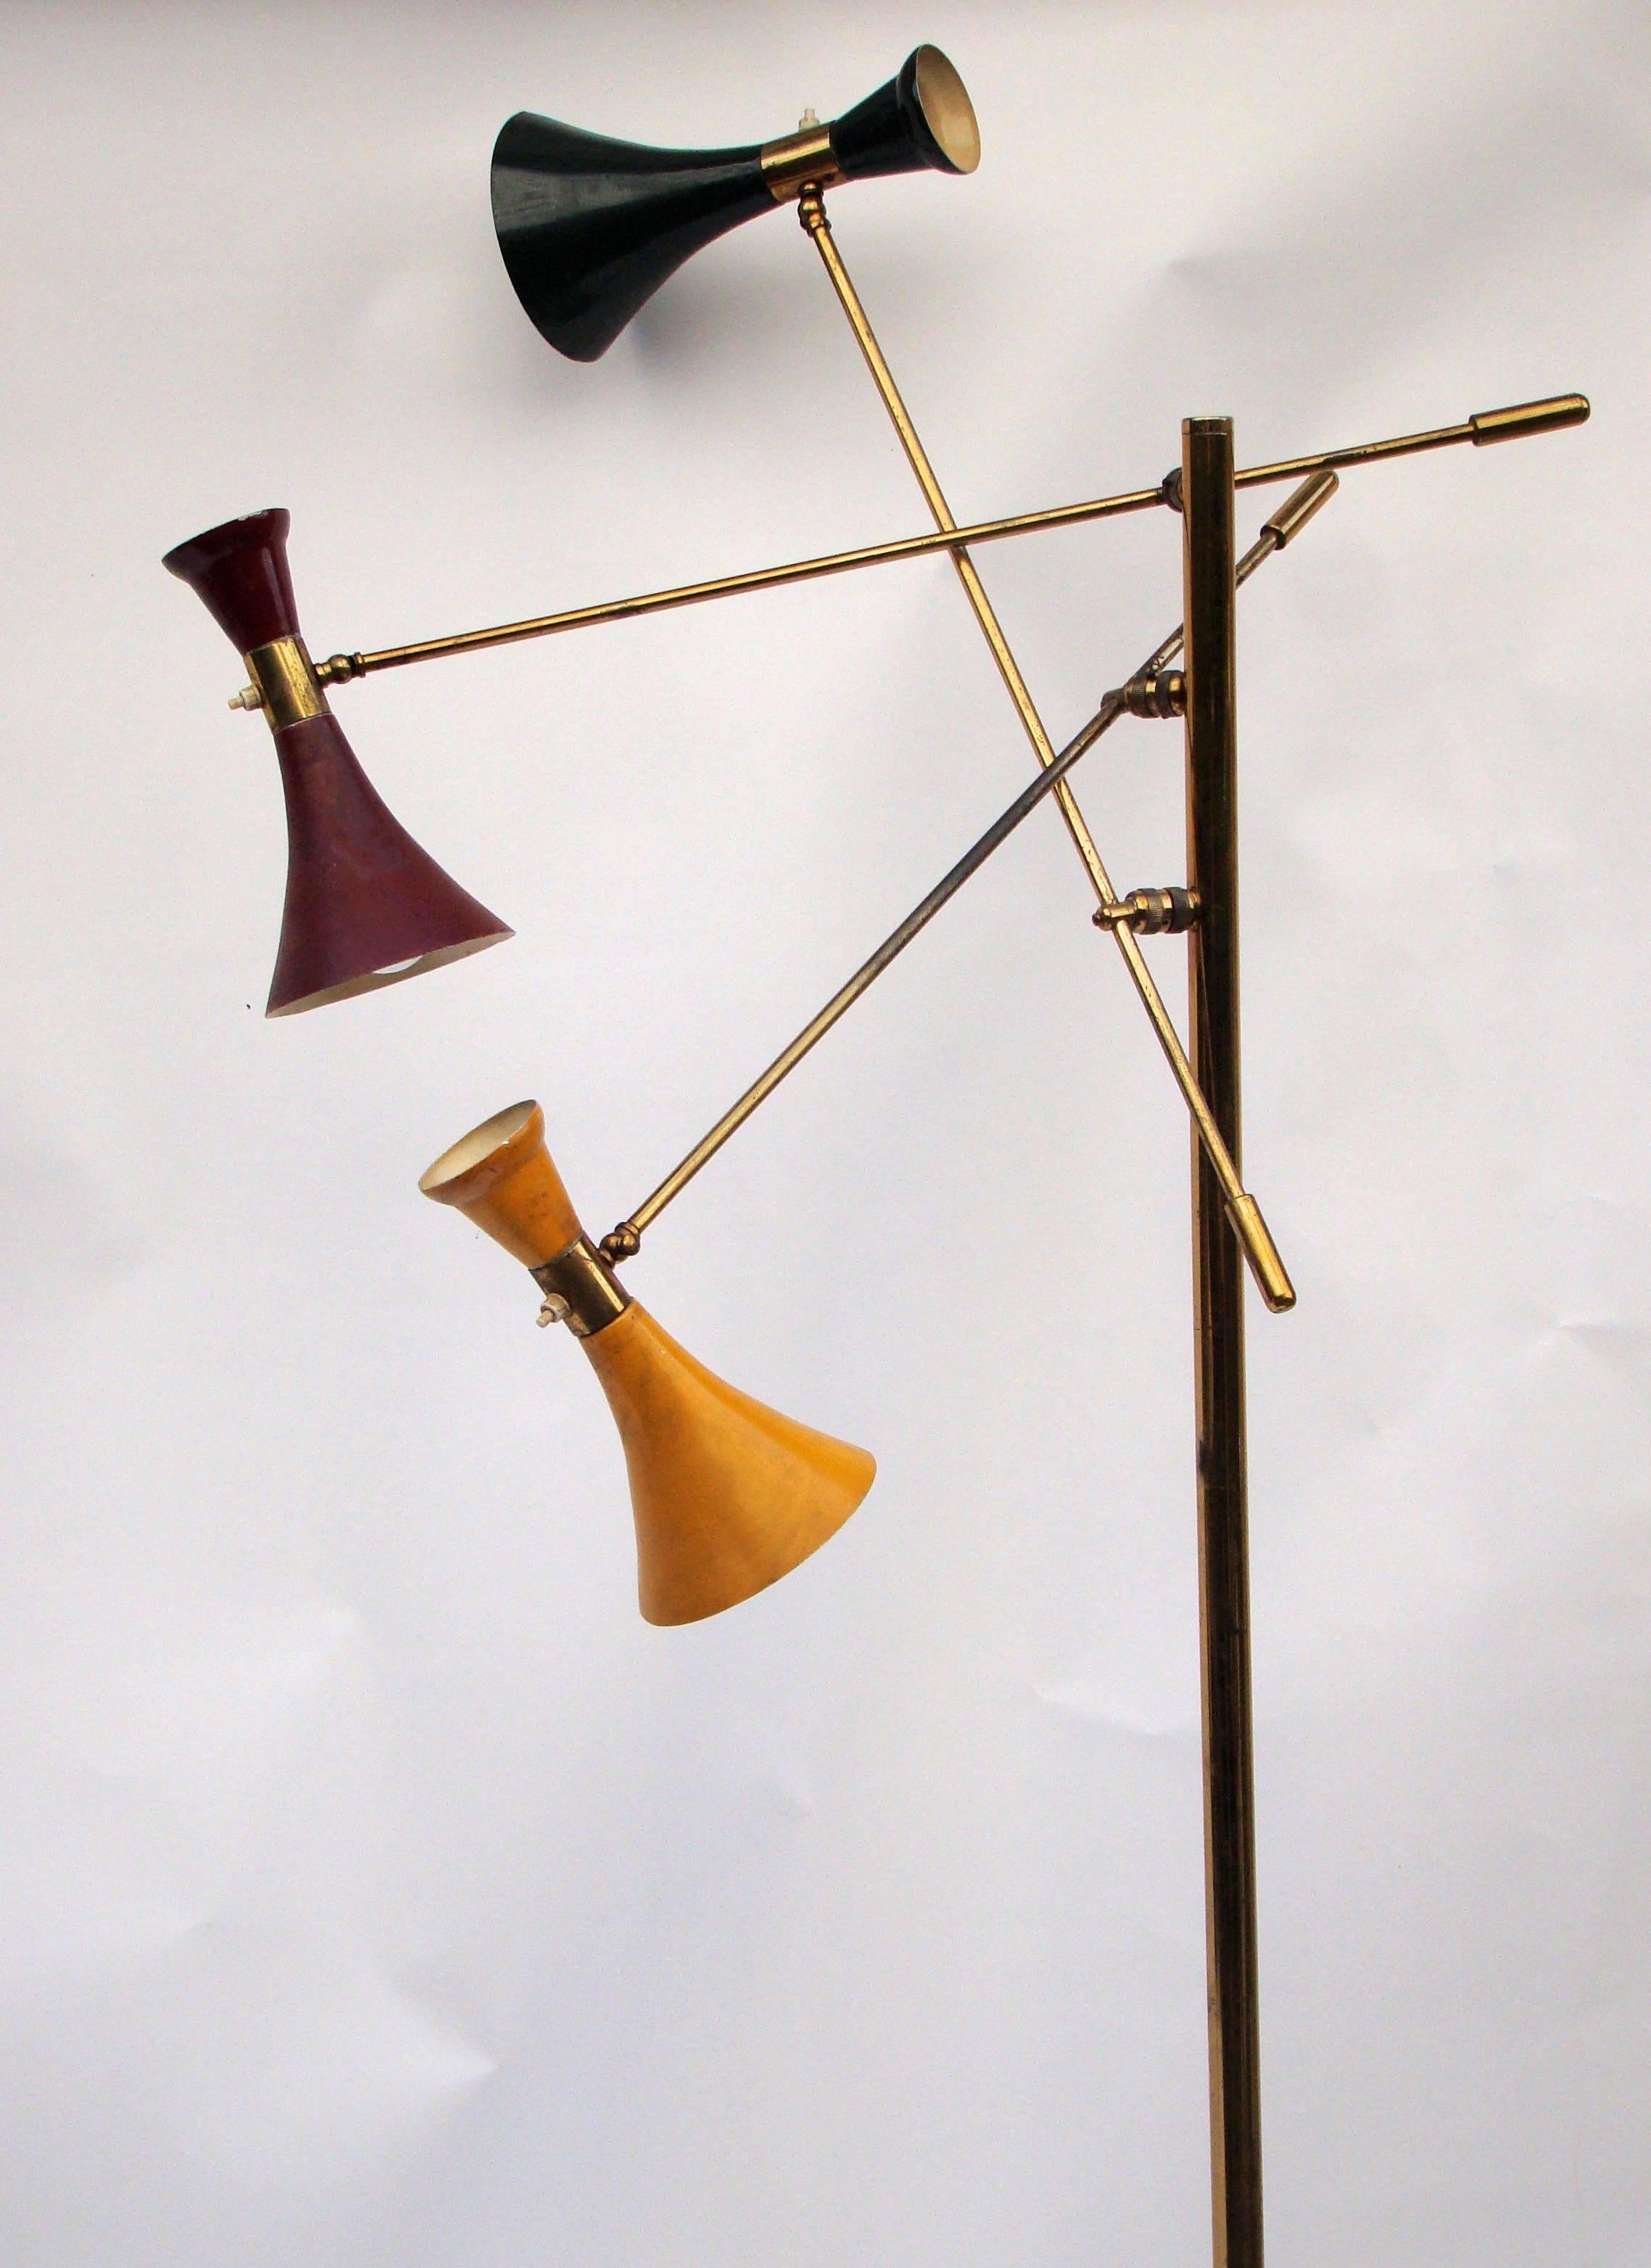 Italian floor lamp in brass and bronze for the base including three adjustable arms in lacquered sheet metal for the lampshade, circa 1950.